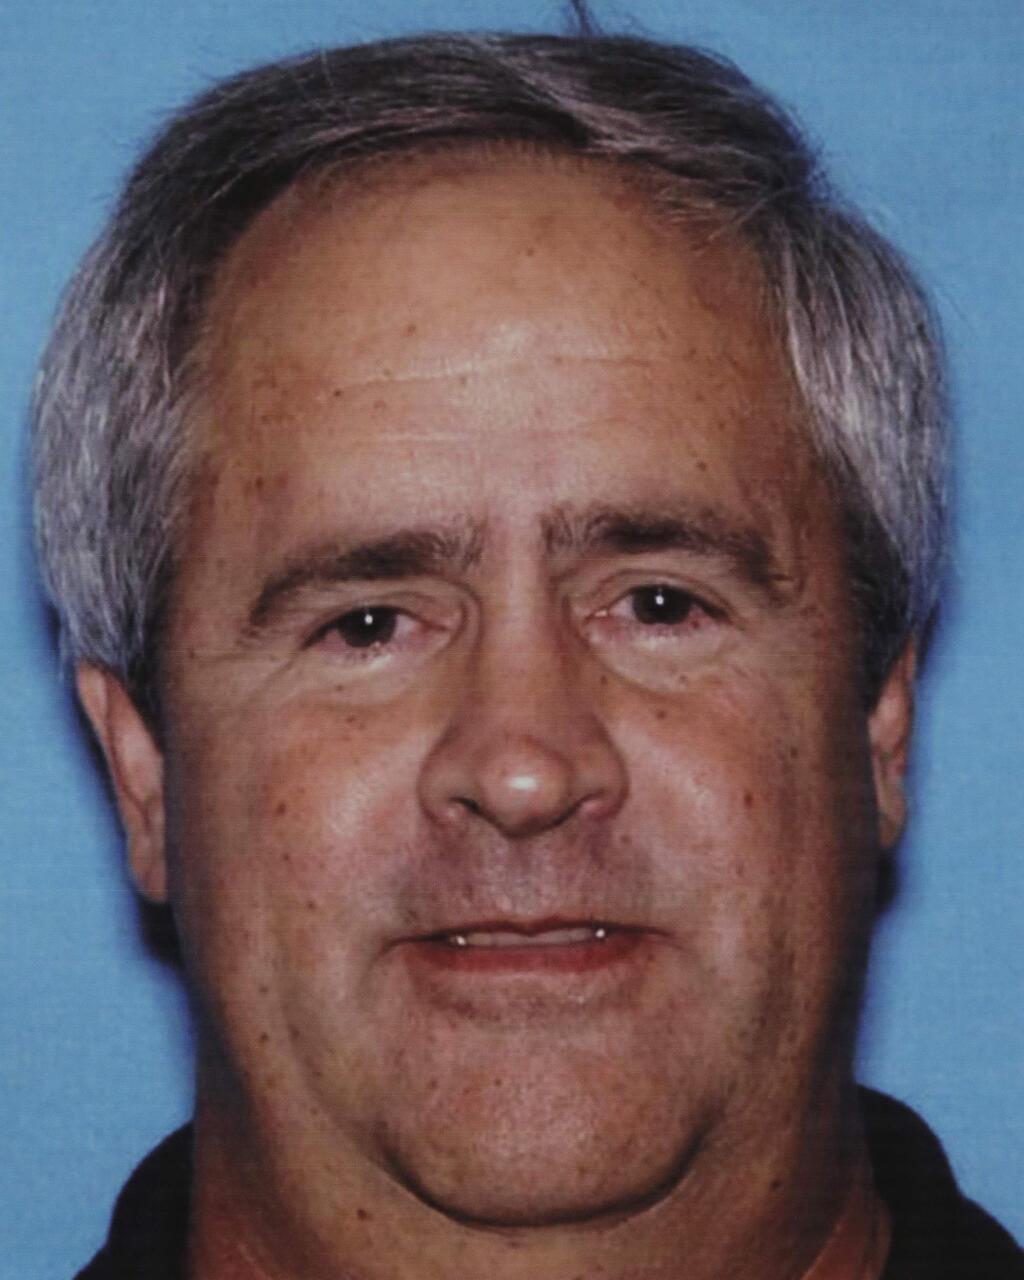 In this undated handout photo provided by the United States District Attorney's Office for the Eastern District of California, shows Michael Carey Clemans. Clemans, 57, was sentenced to life in federal prison, Tuesday, Jan. 23, 2018, for buying Filipino children for sex and pornography. (United States District Attorney's Office for the Eastern District of California via AP.)